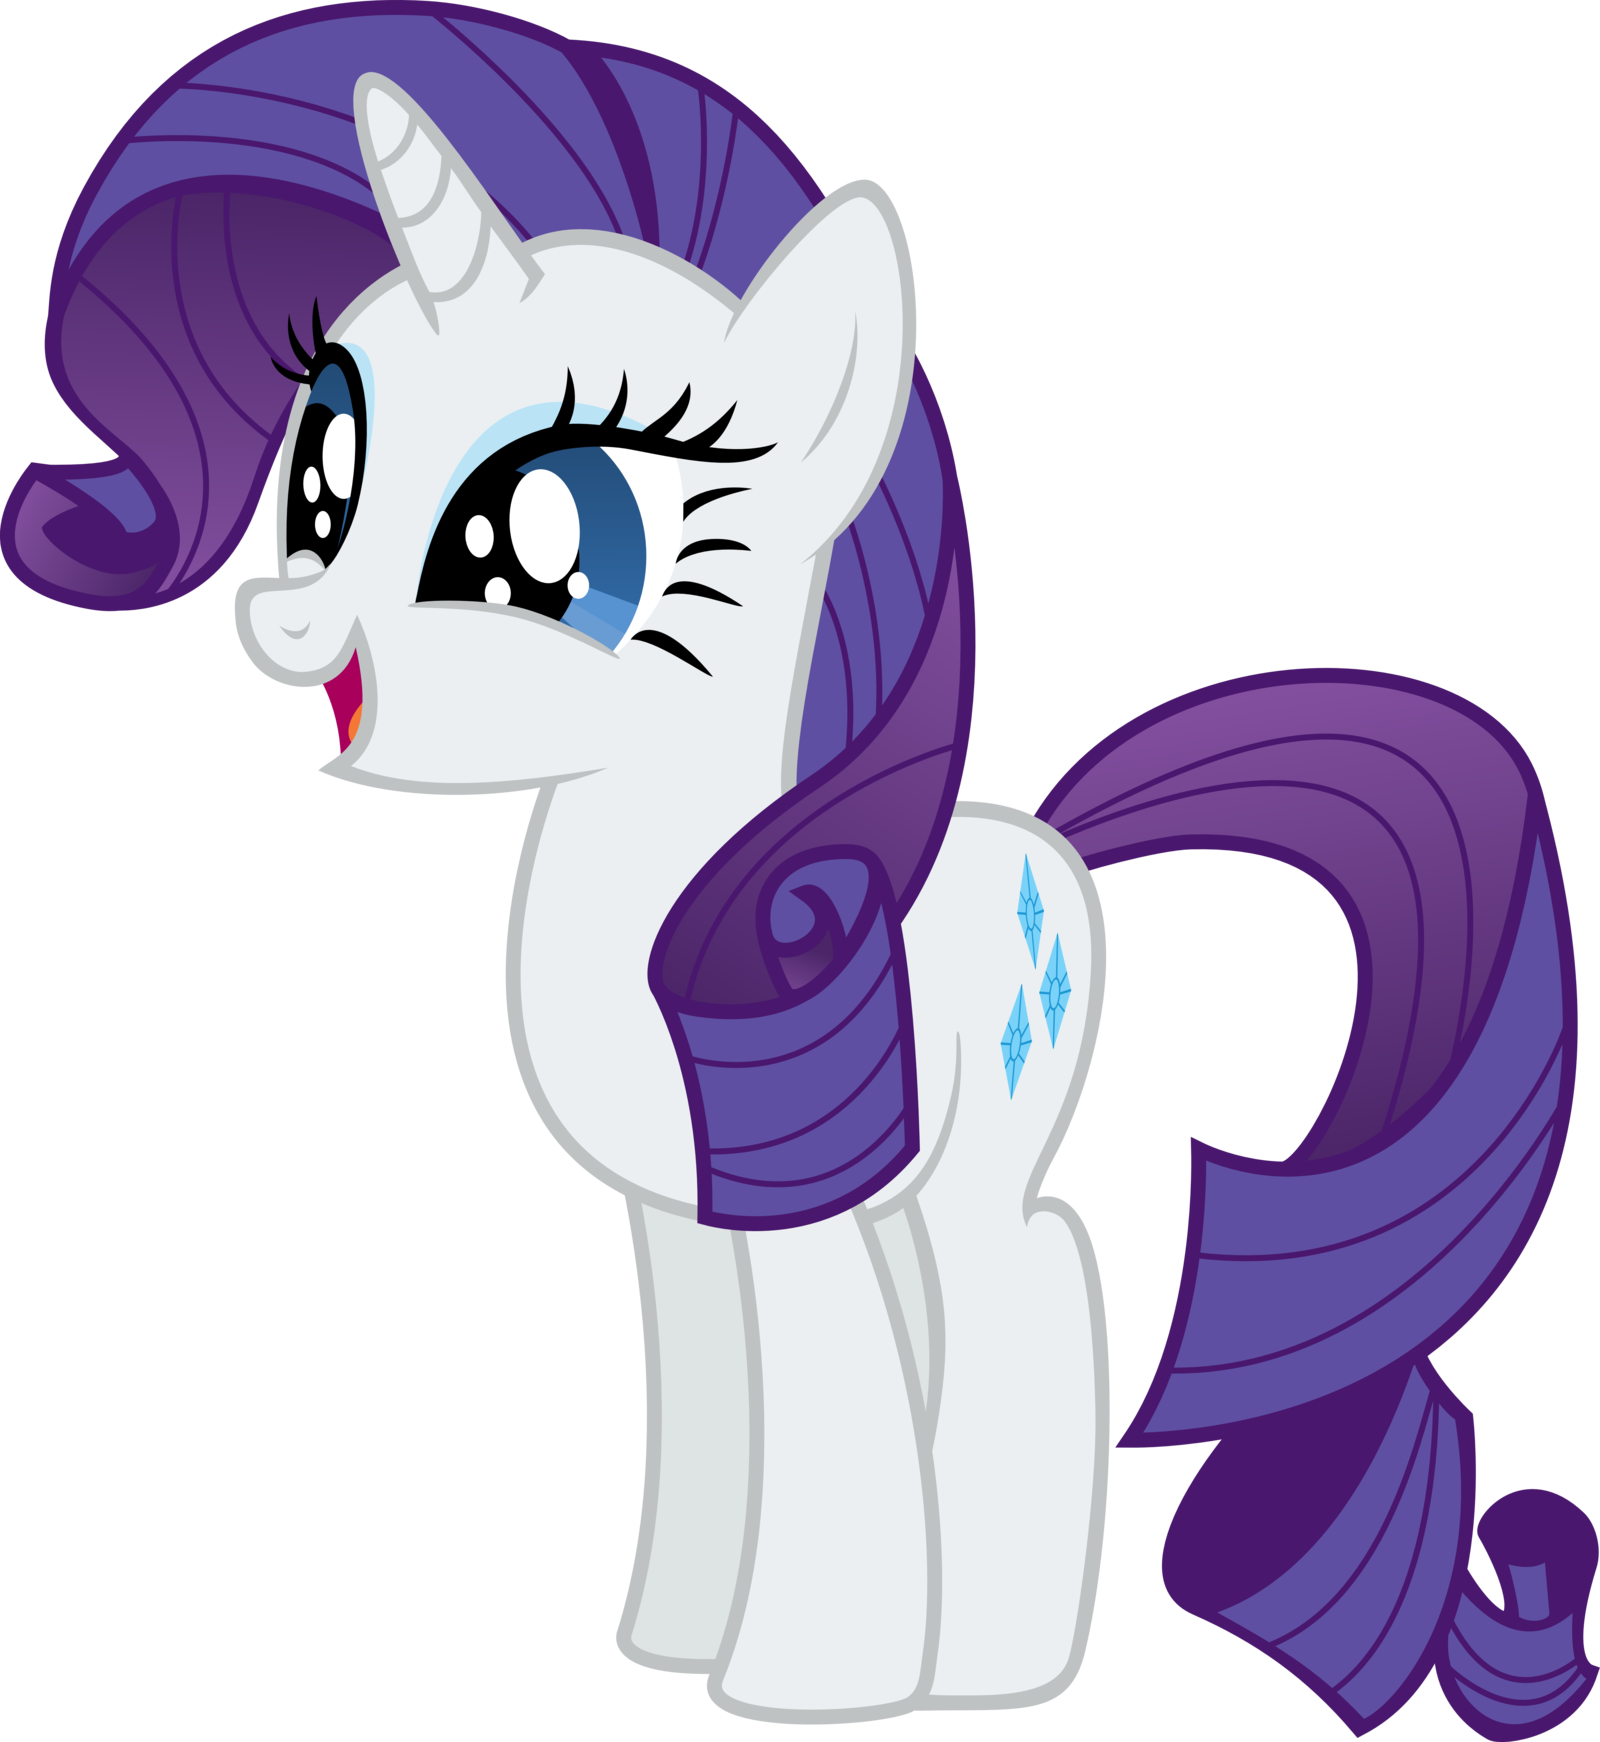 rarity_delight_by_synthrid-d57lw1d.png